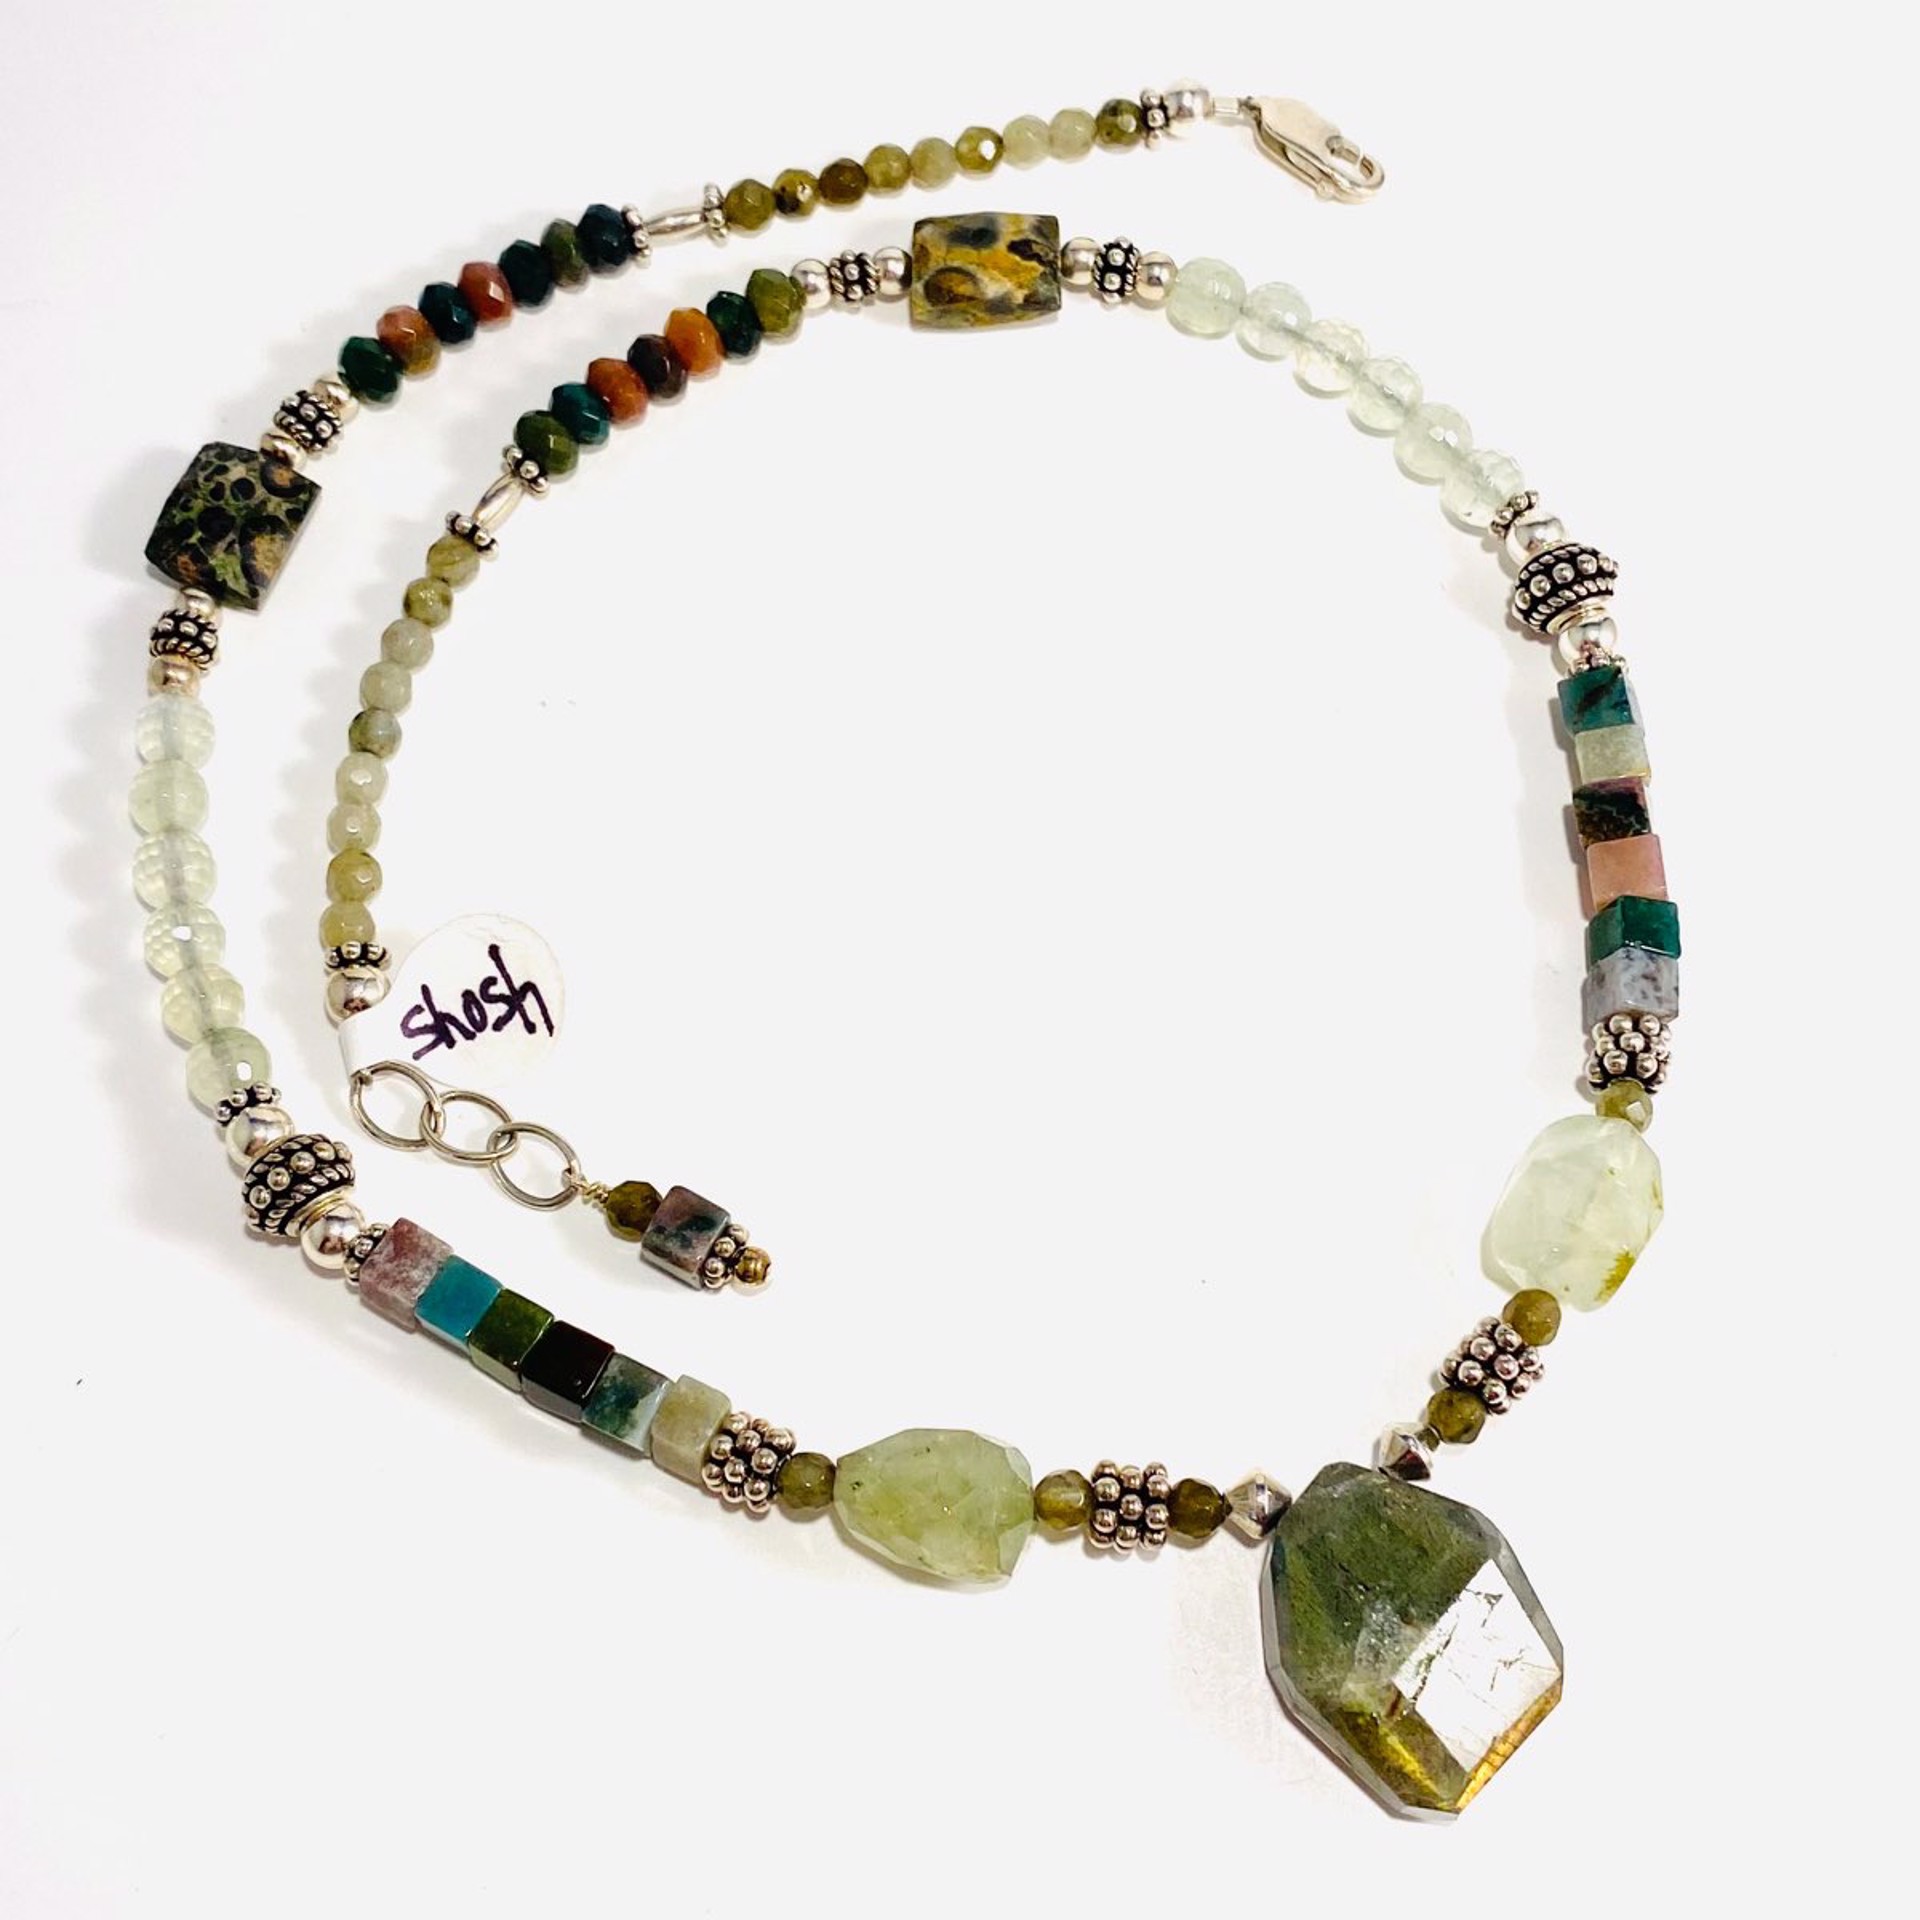 Faceted Labradorite Pendant on Chrysoprase Agate Fluorite 20” Necklace SHOSH22-8 by Shoshannah Weinisch